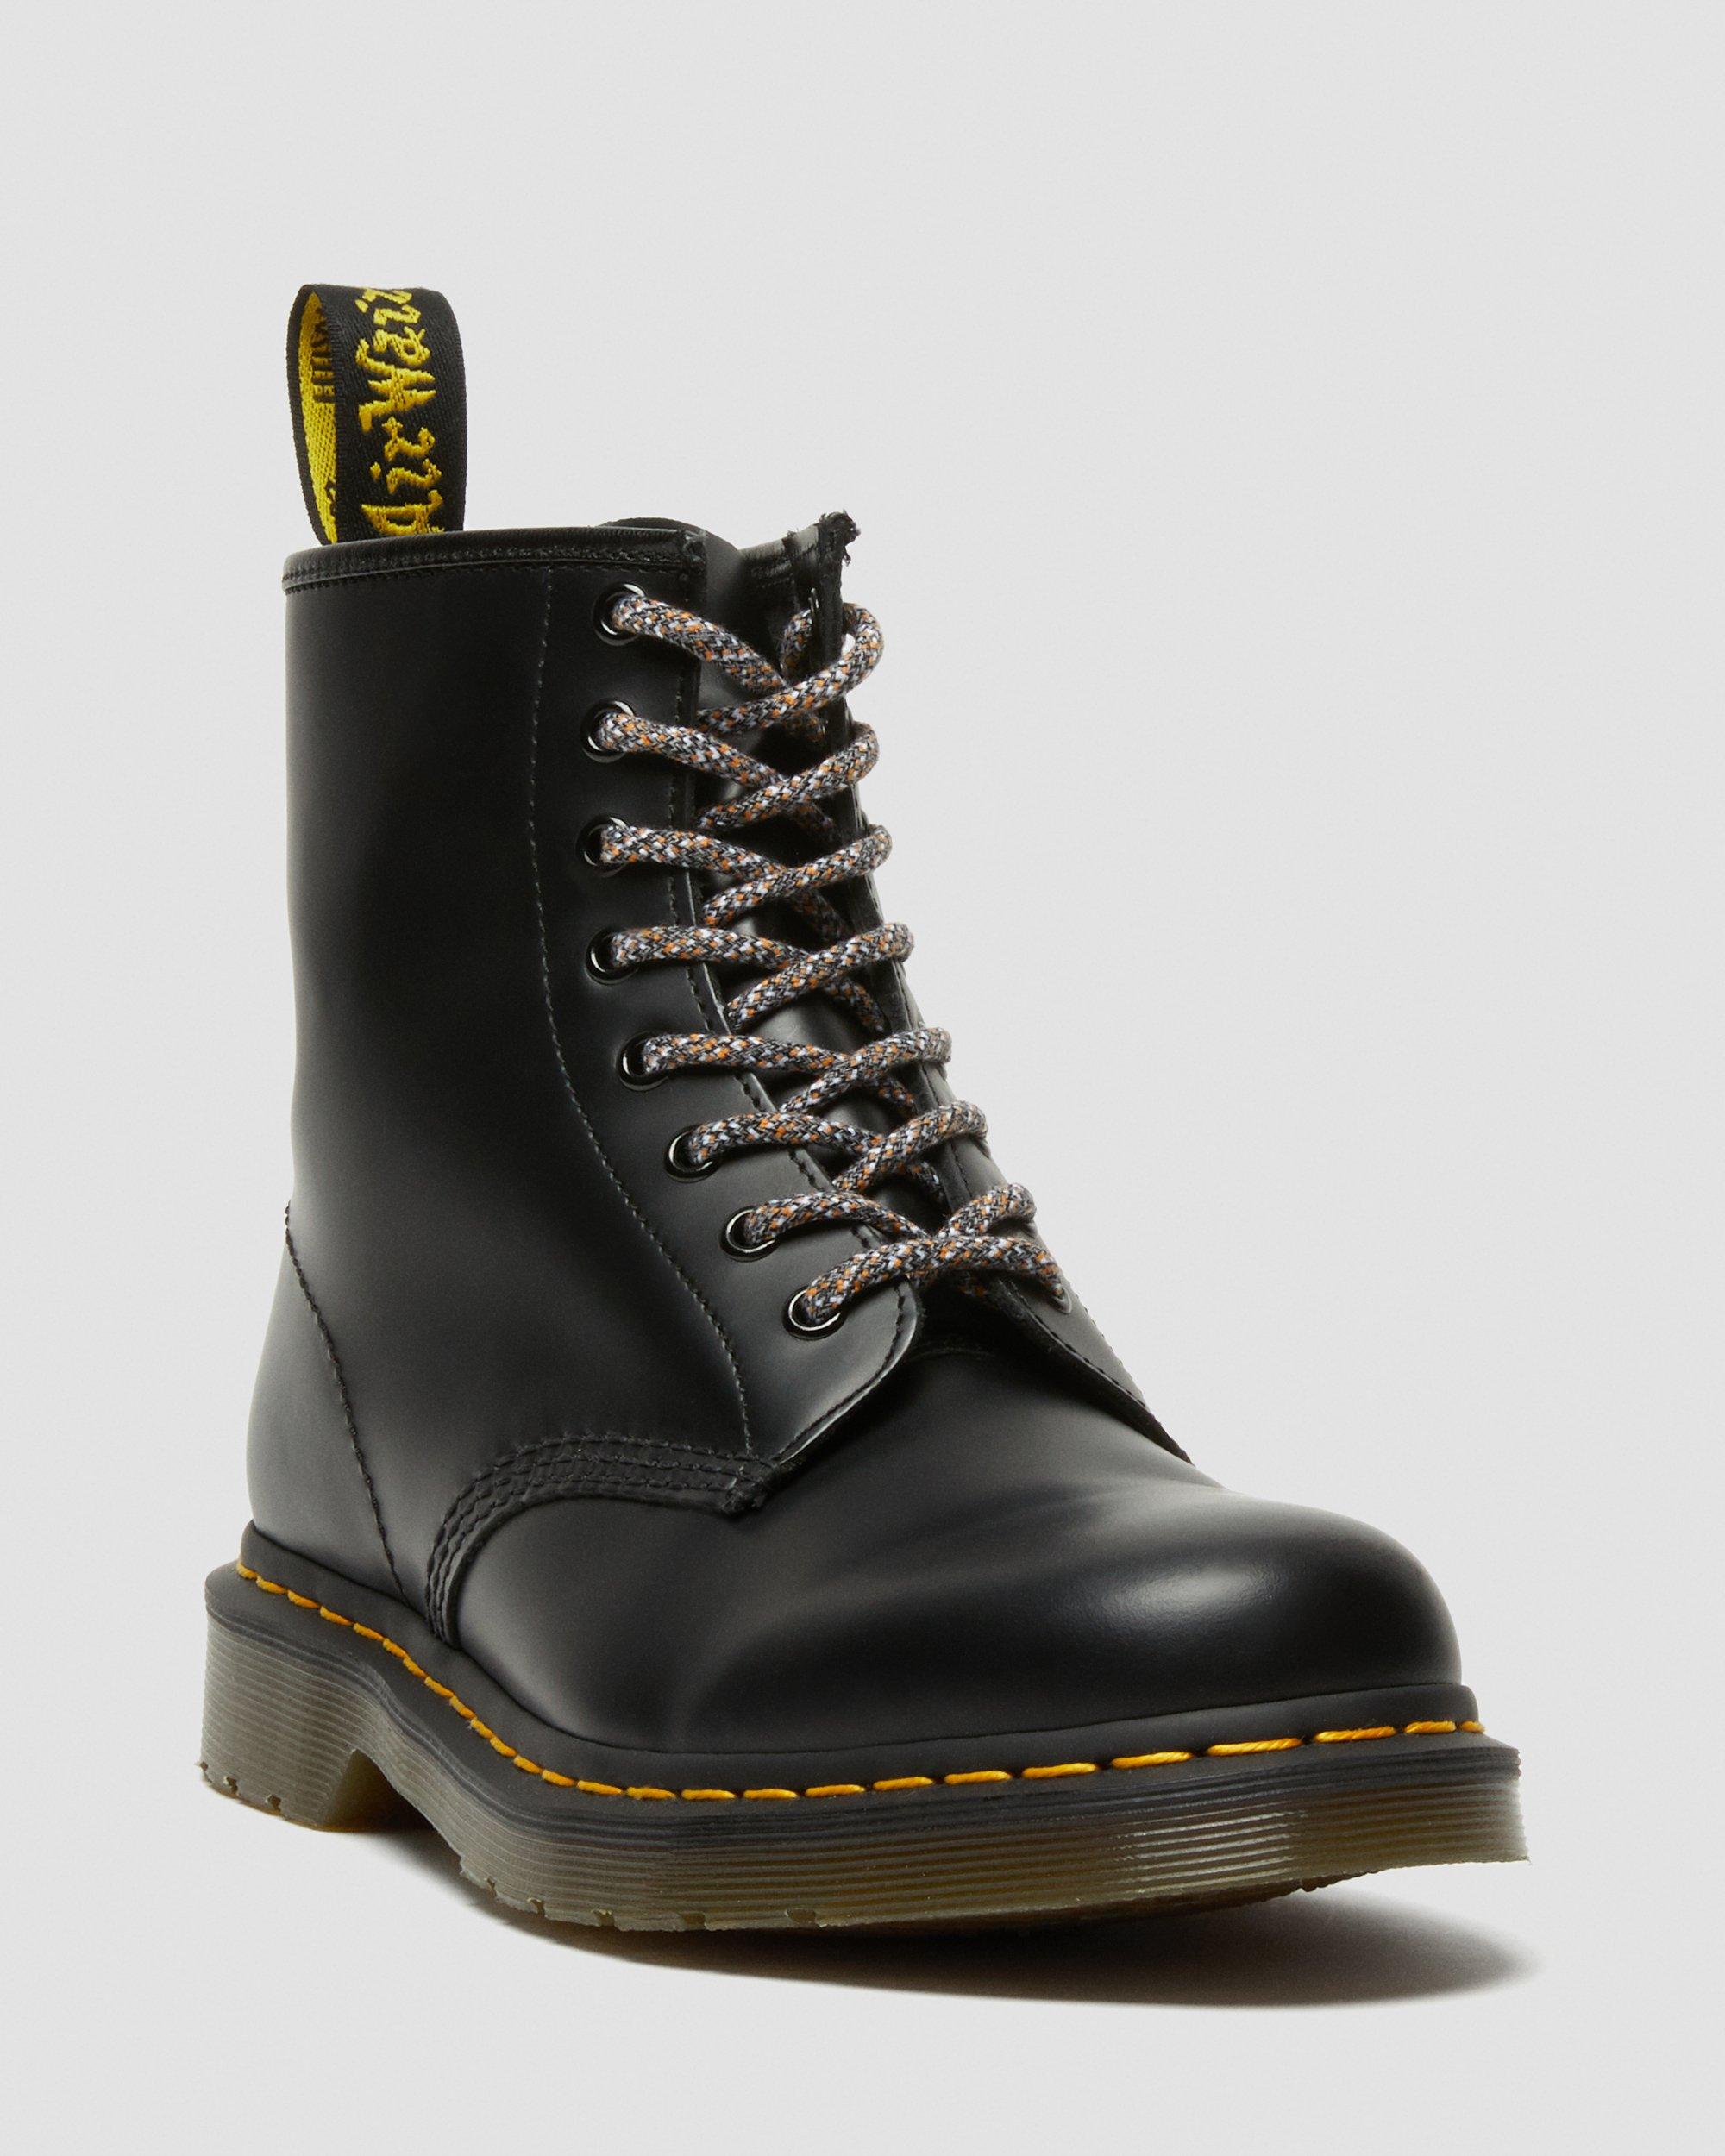 55 Inch Round Marl Shoe Laces (8-10 Eye) in Grey | Dr. Martens